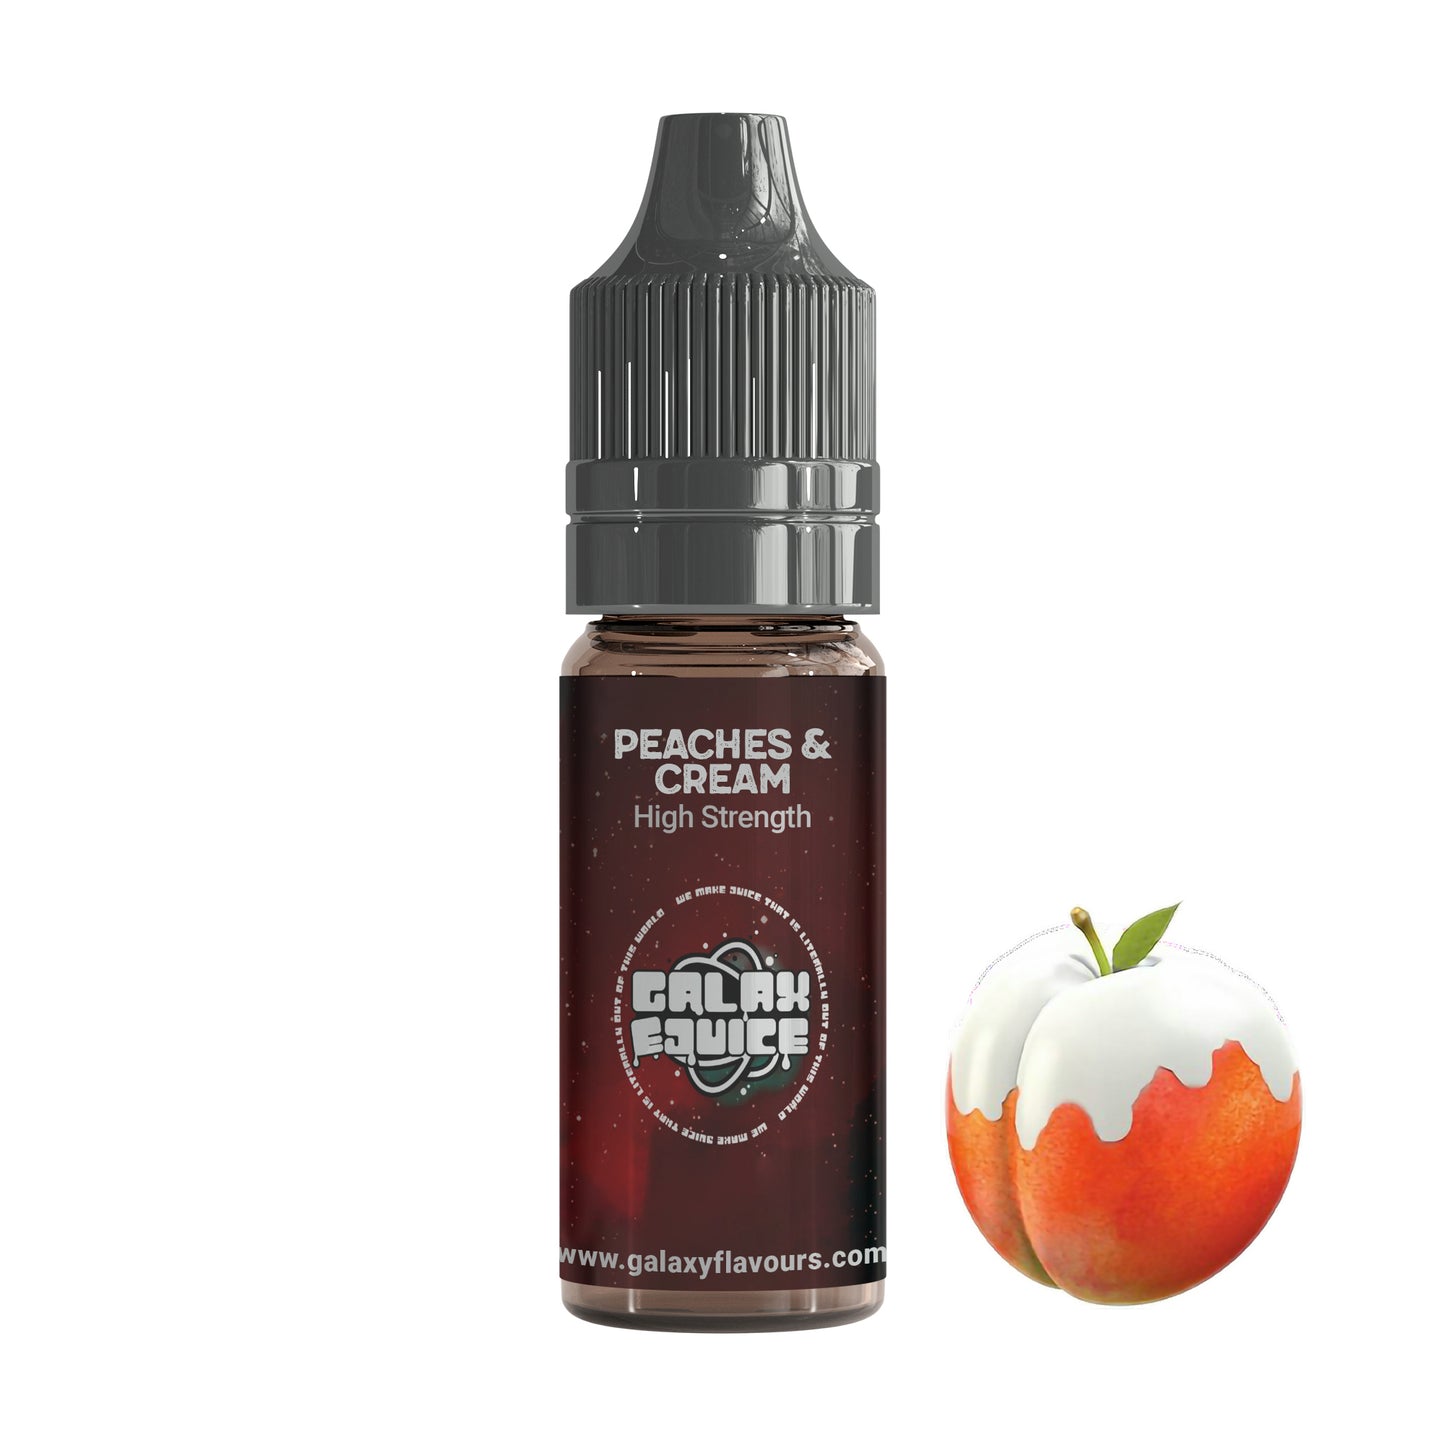 Peaches and Cream High Strength Professional Flavouring.